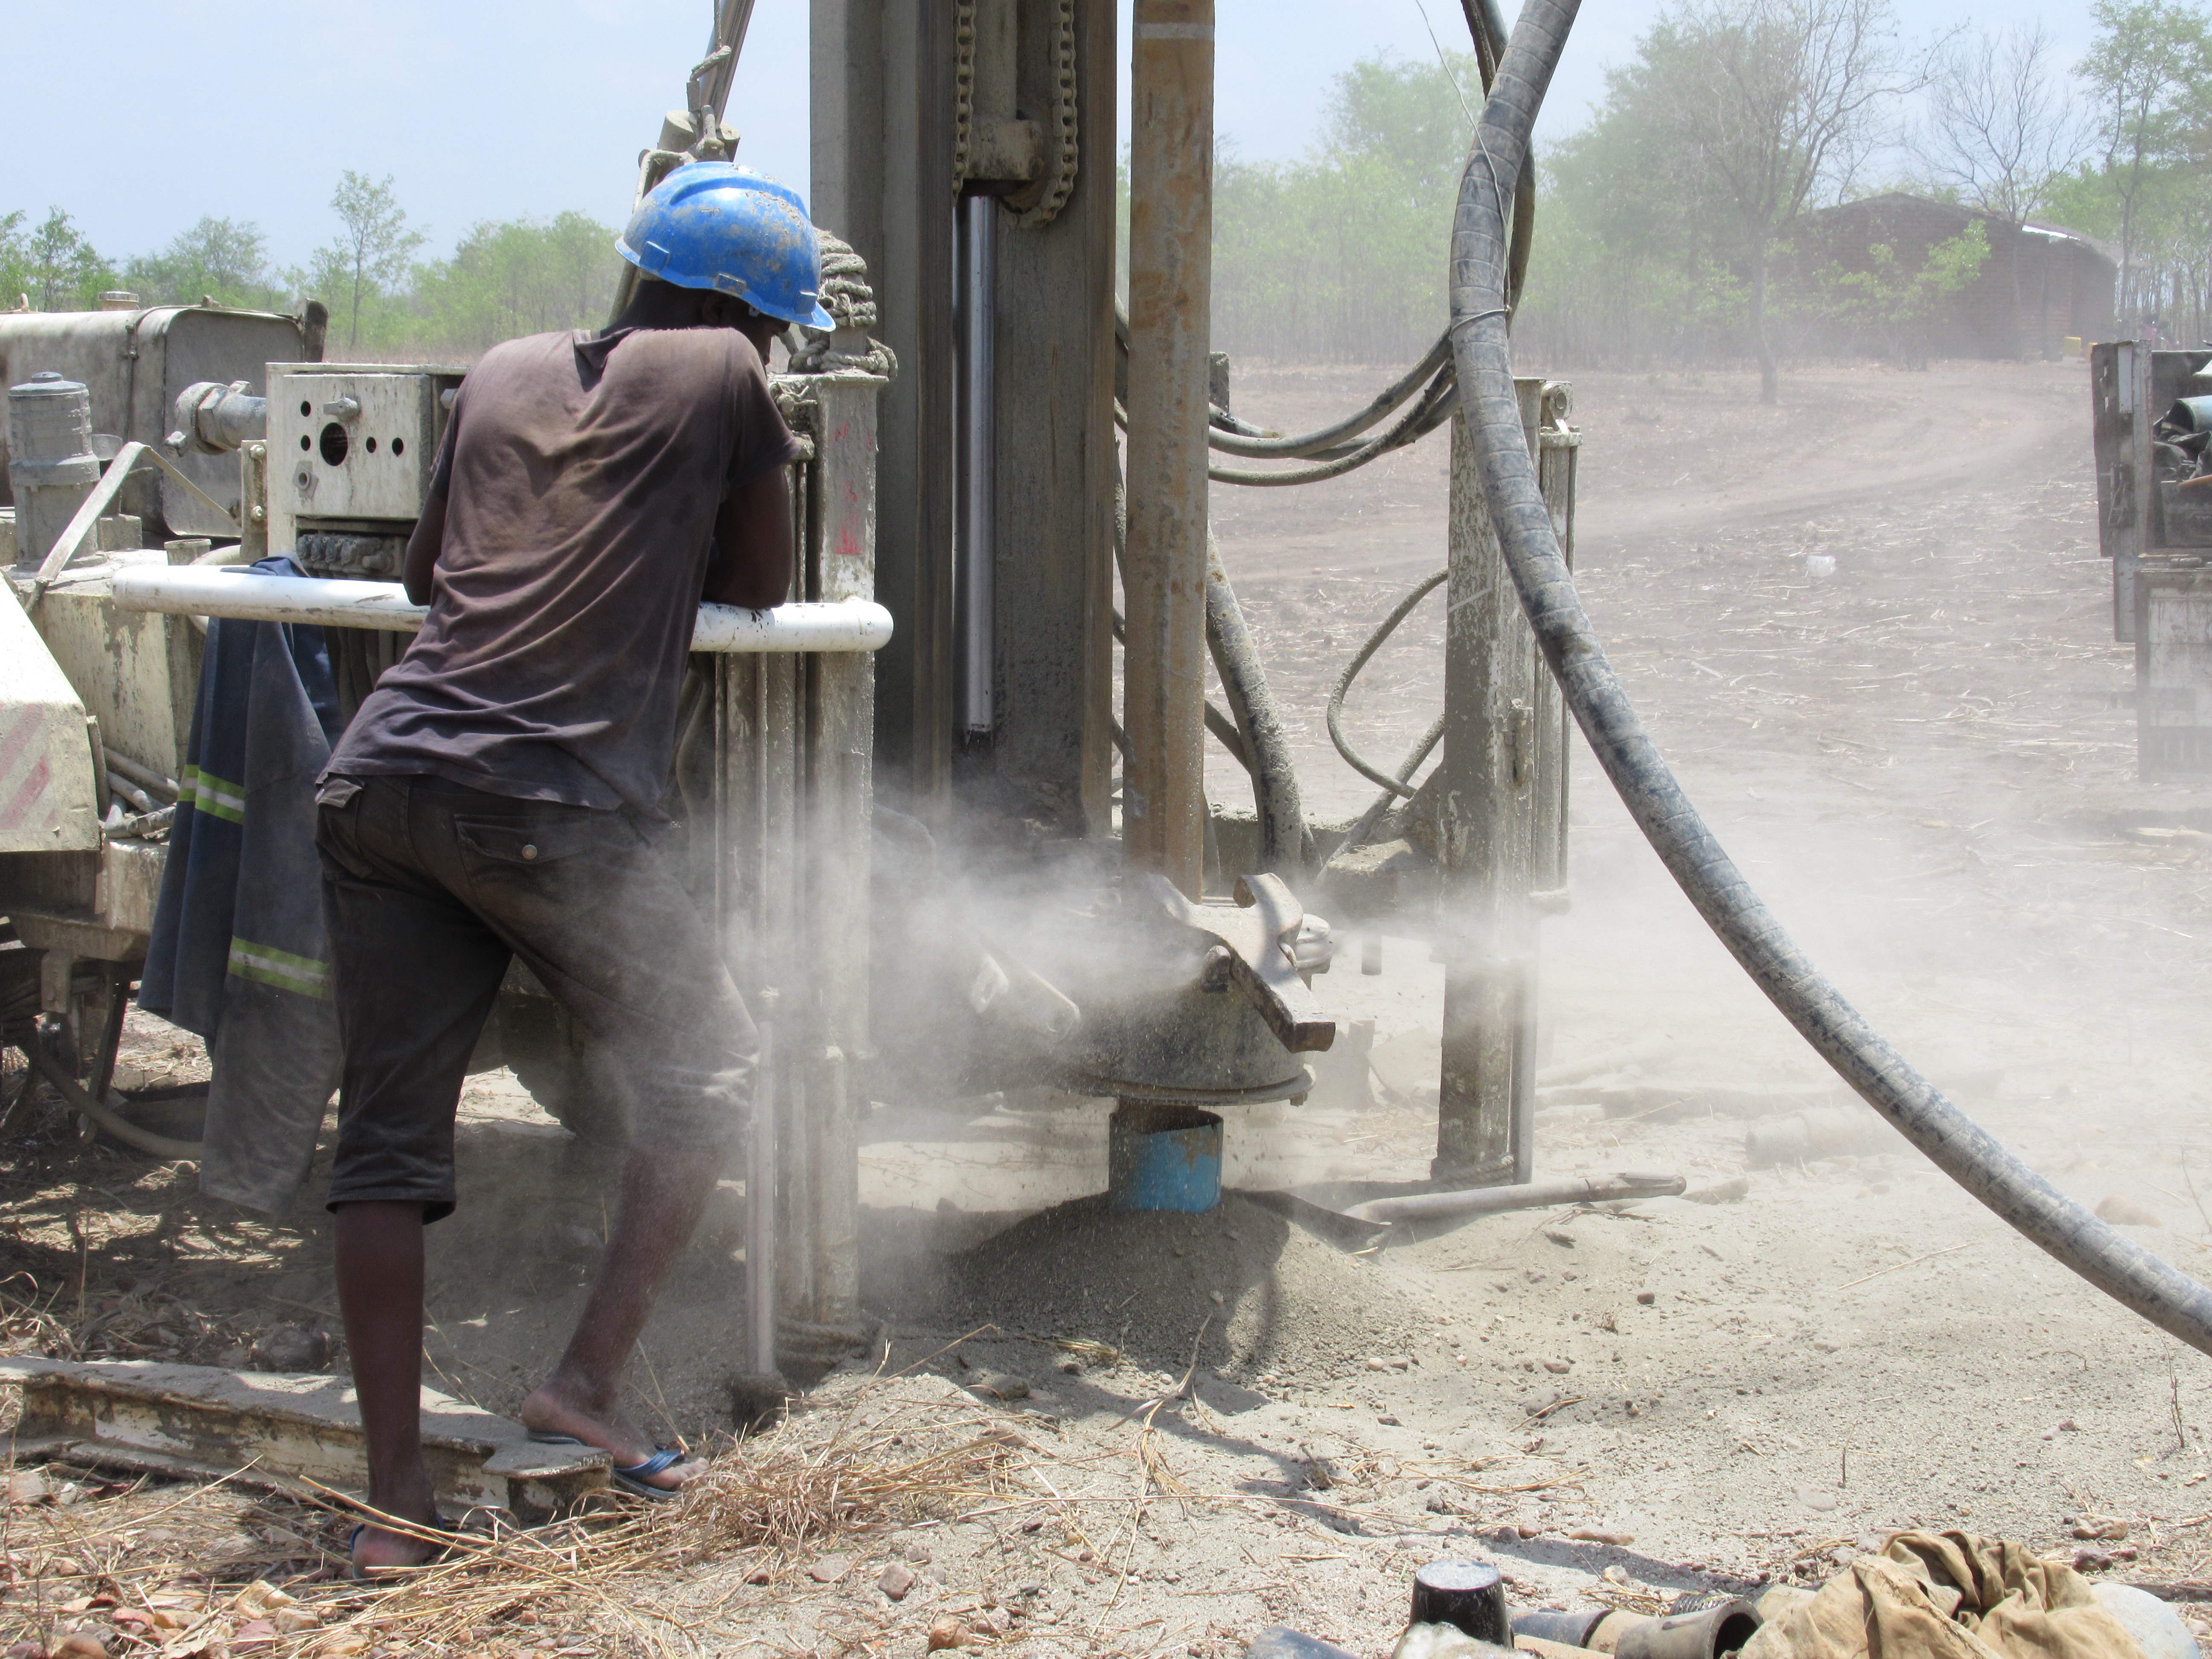 Drillers are contracted by an NGO to install new water points in a drought prone area of Balaka District, Malawi